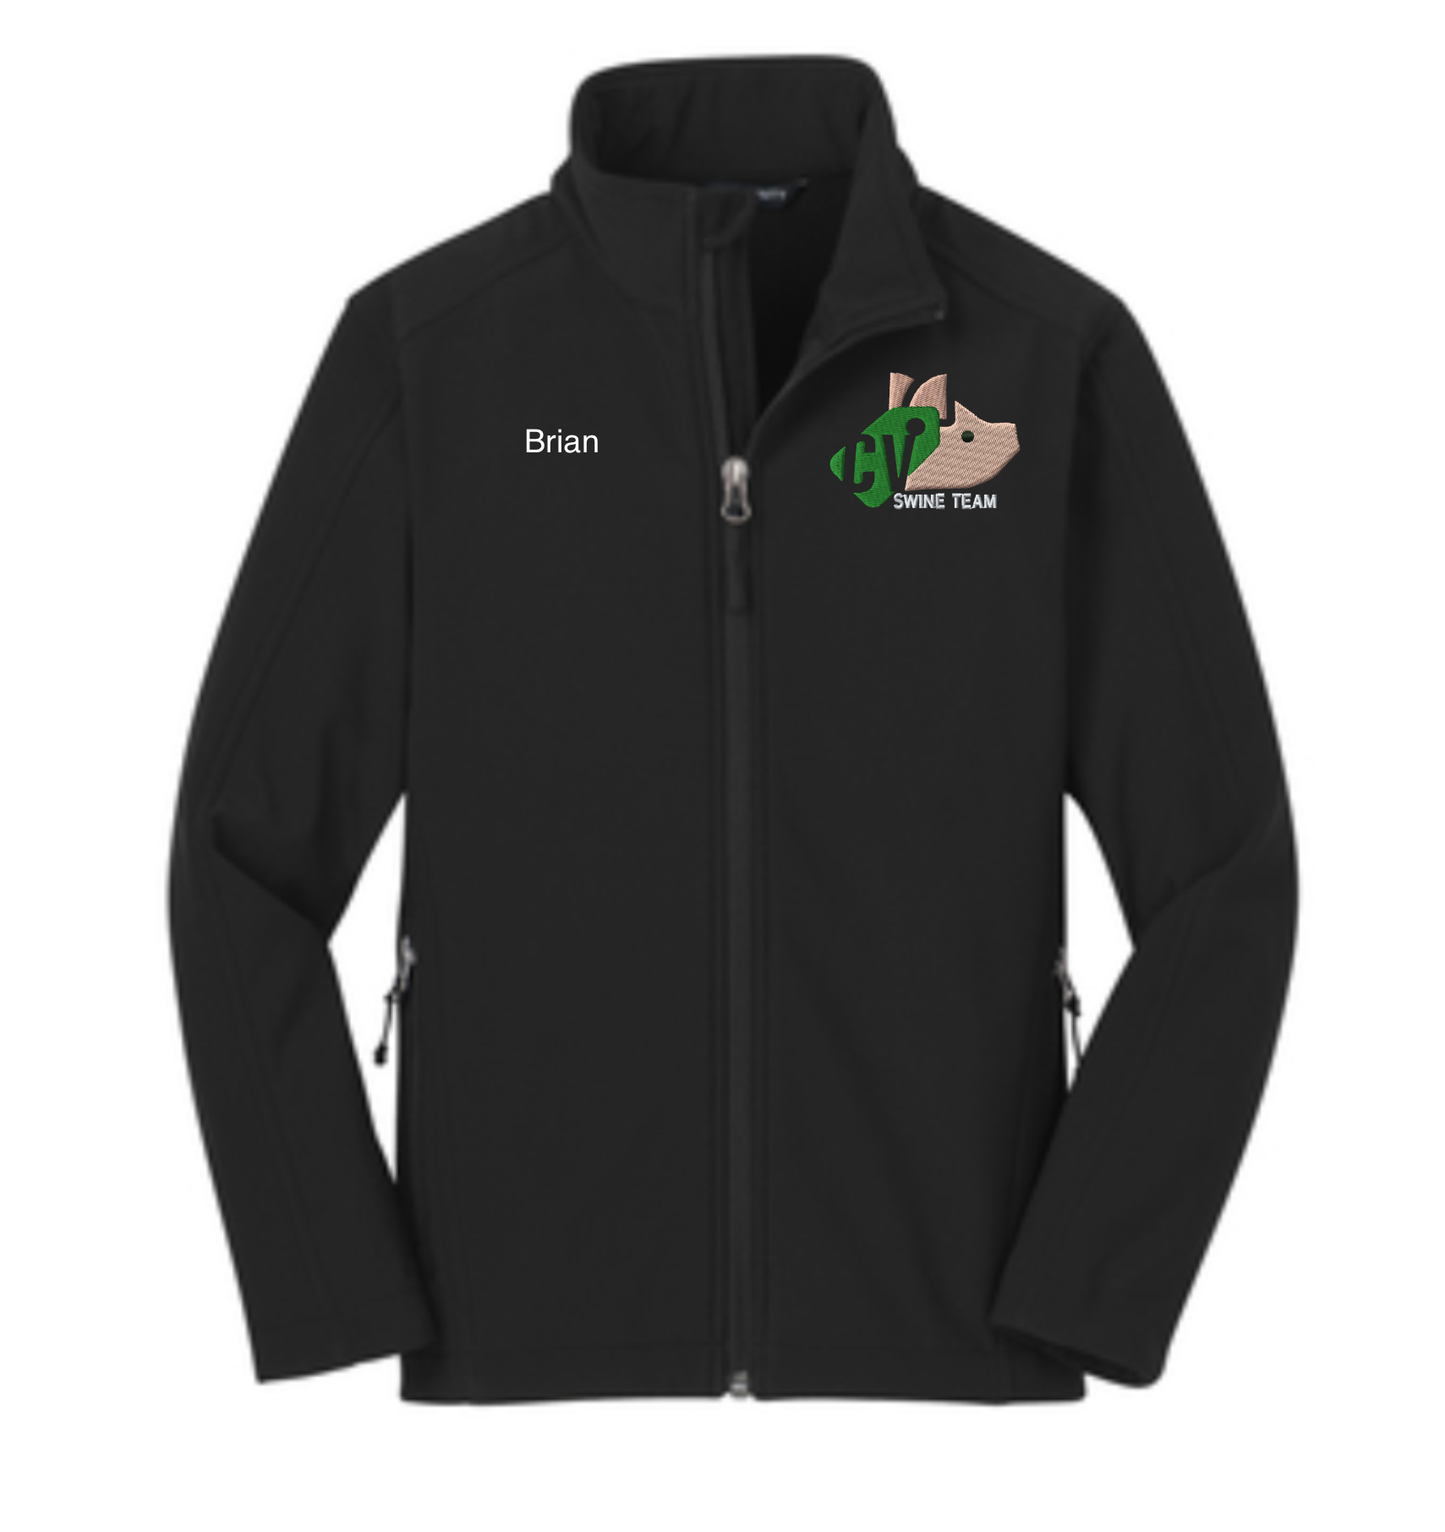 Men's Carmel Valley 4-H Personalized Swine Team 4-H Port Authority Soft Shell Jacket